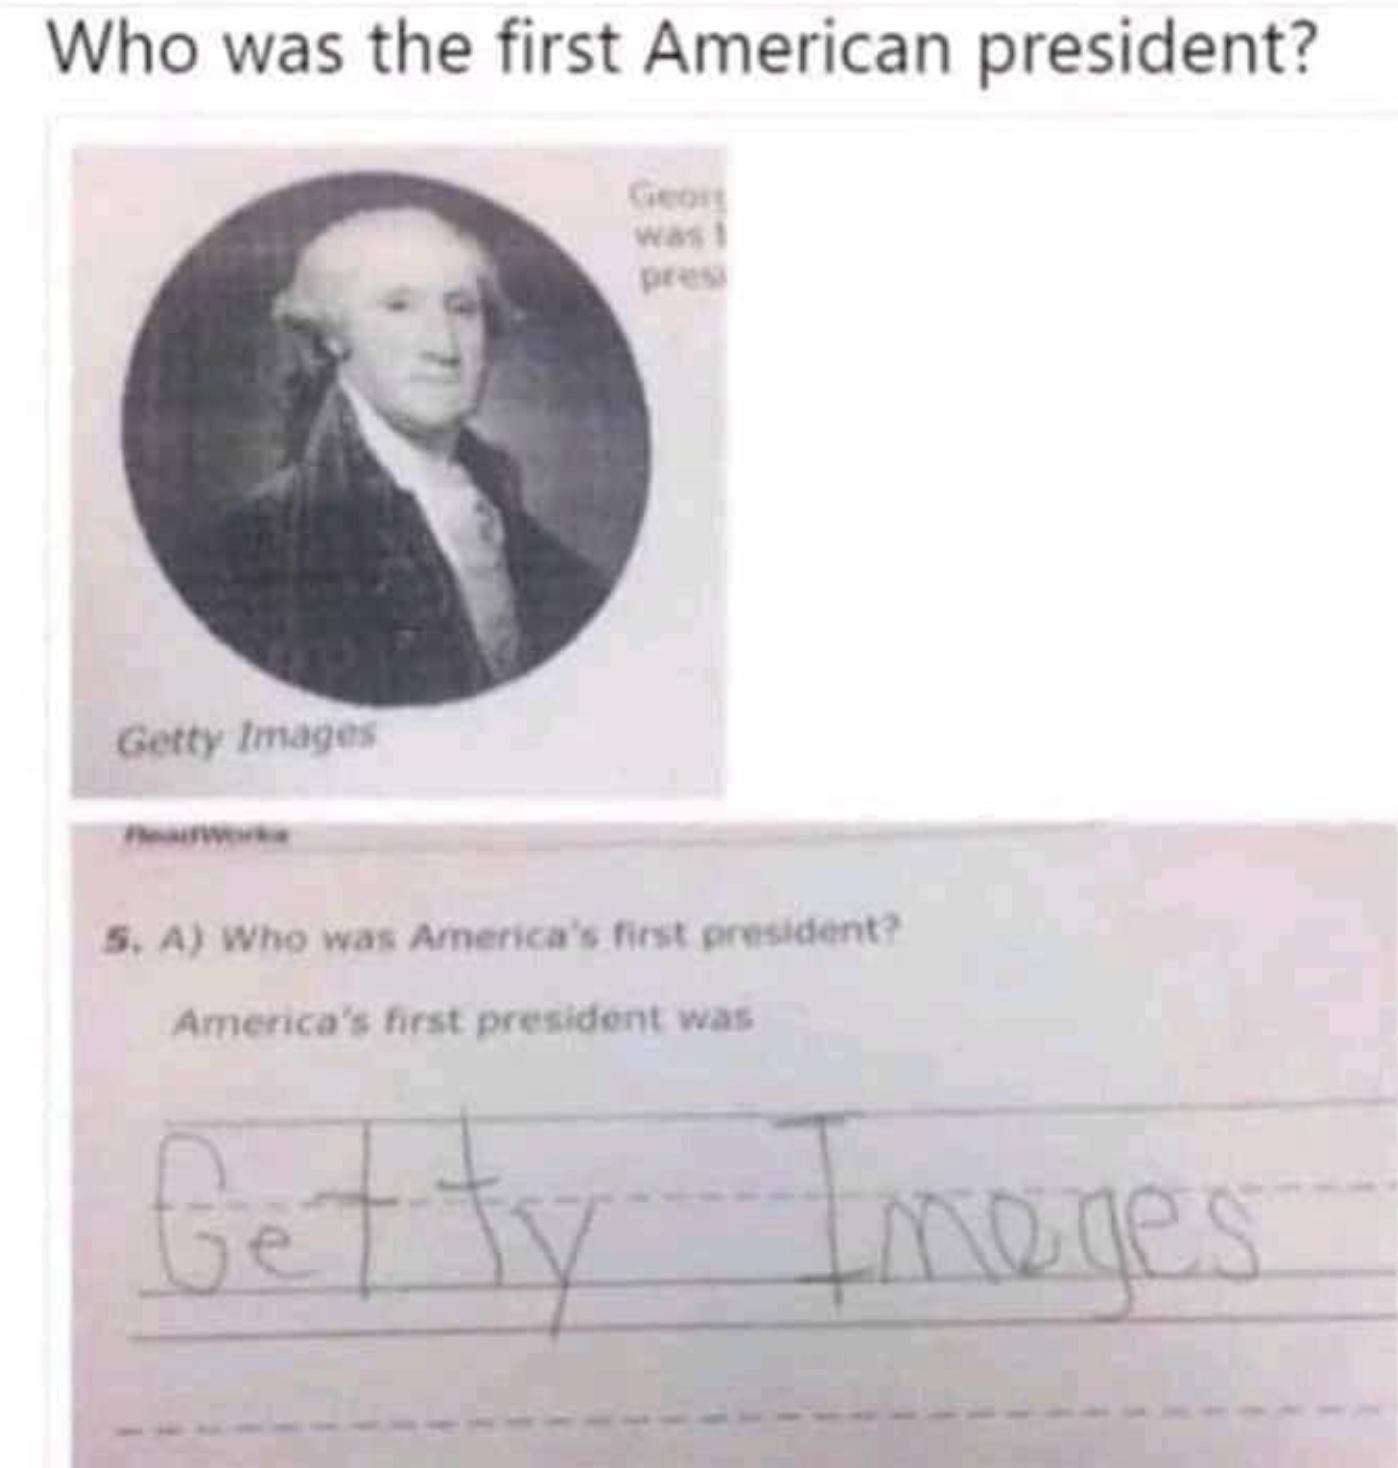 first american president getty - Who was the first American president? pre Getty Images 5. A Who was America's first president America's first president was Getty Images